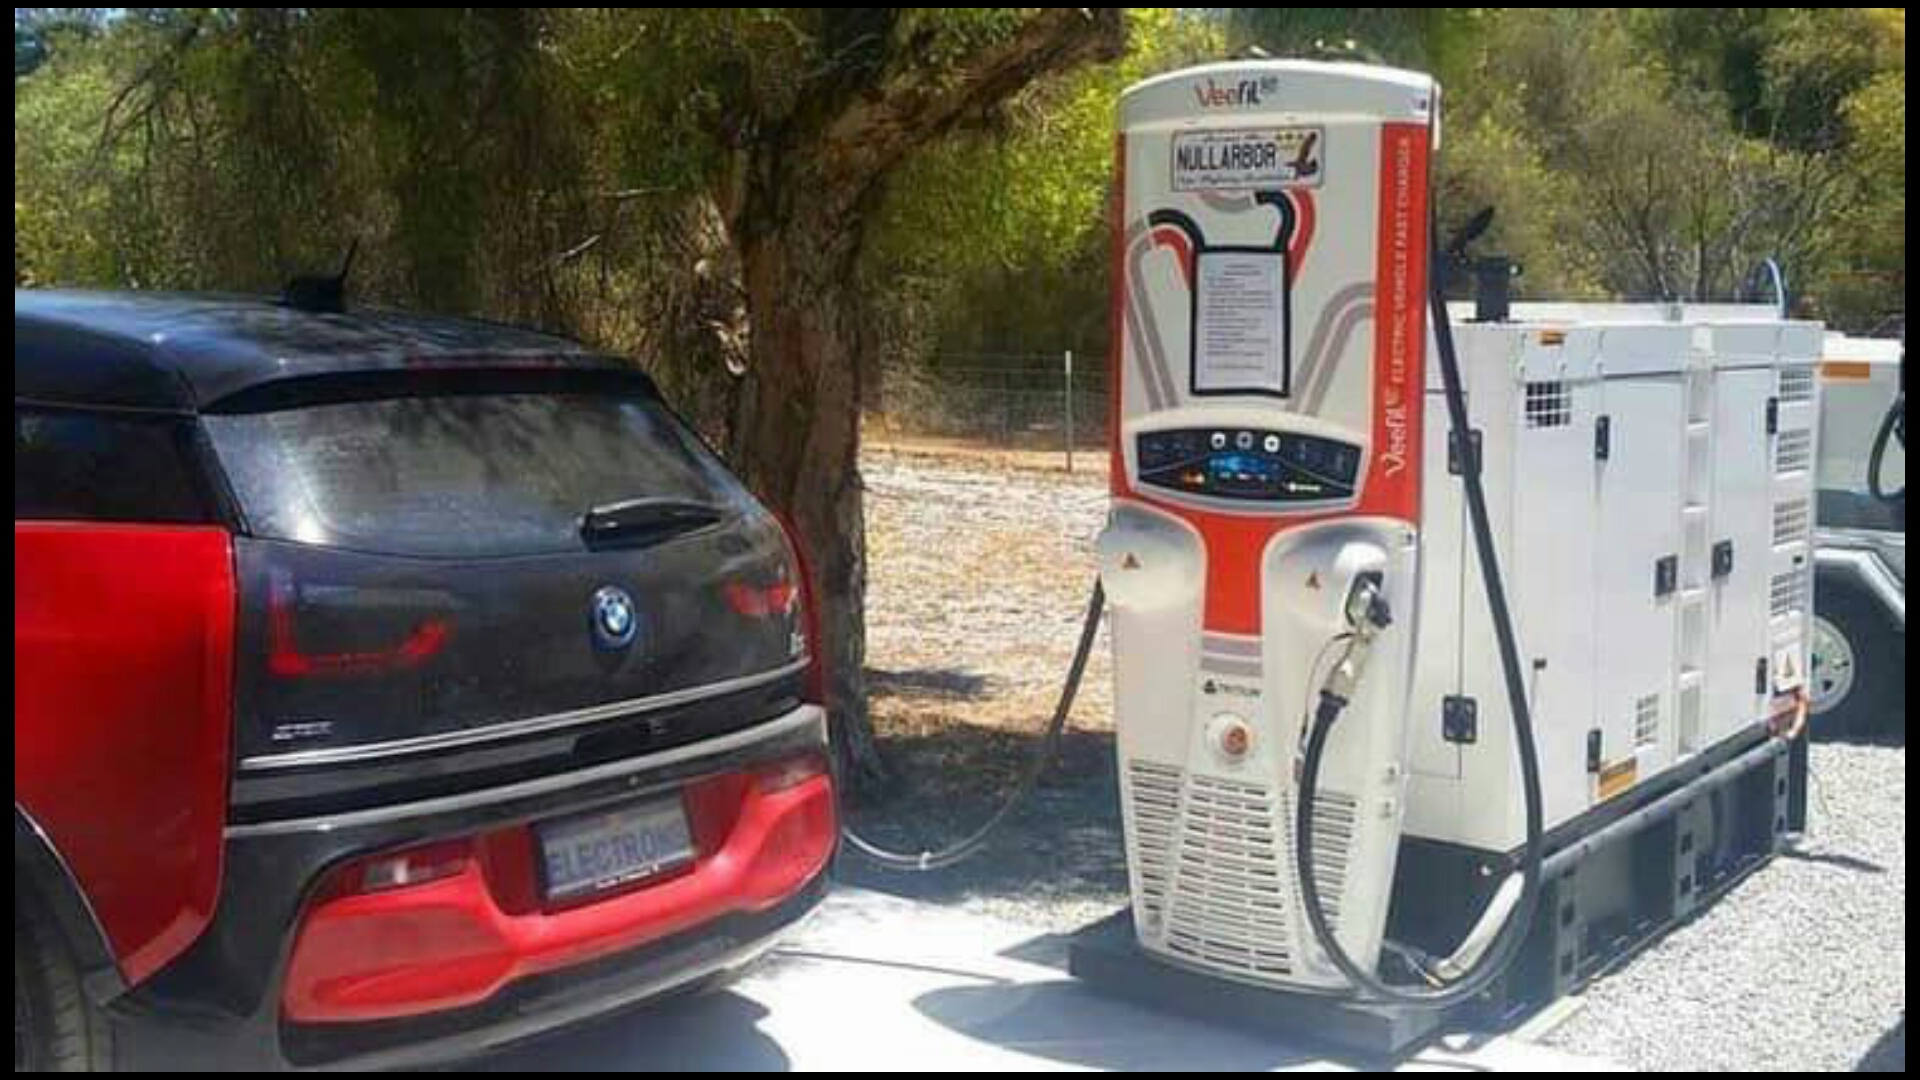 Electric car chargers running on diesel generators...